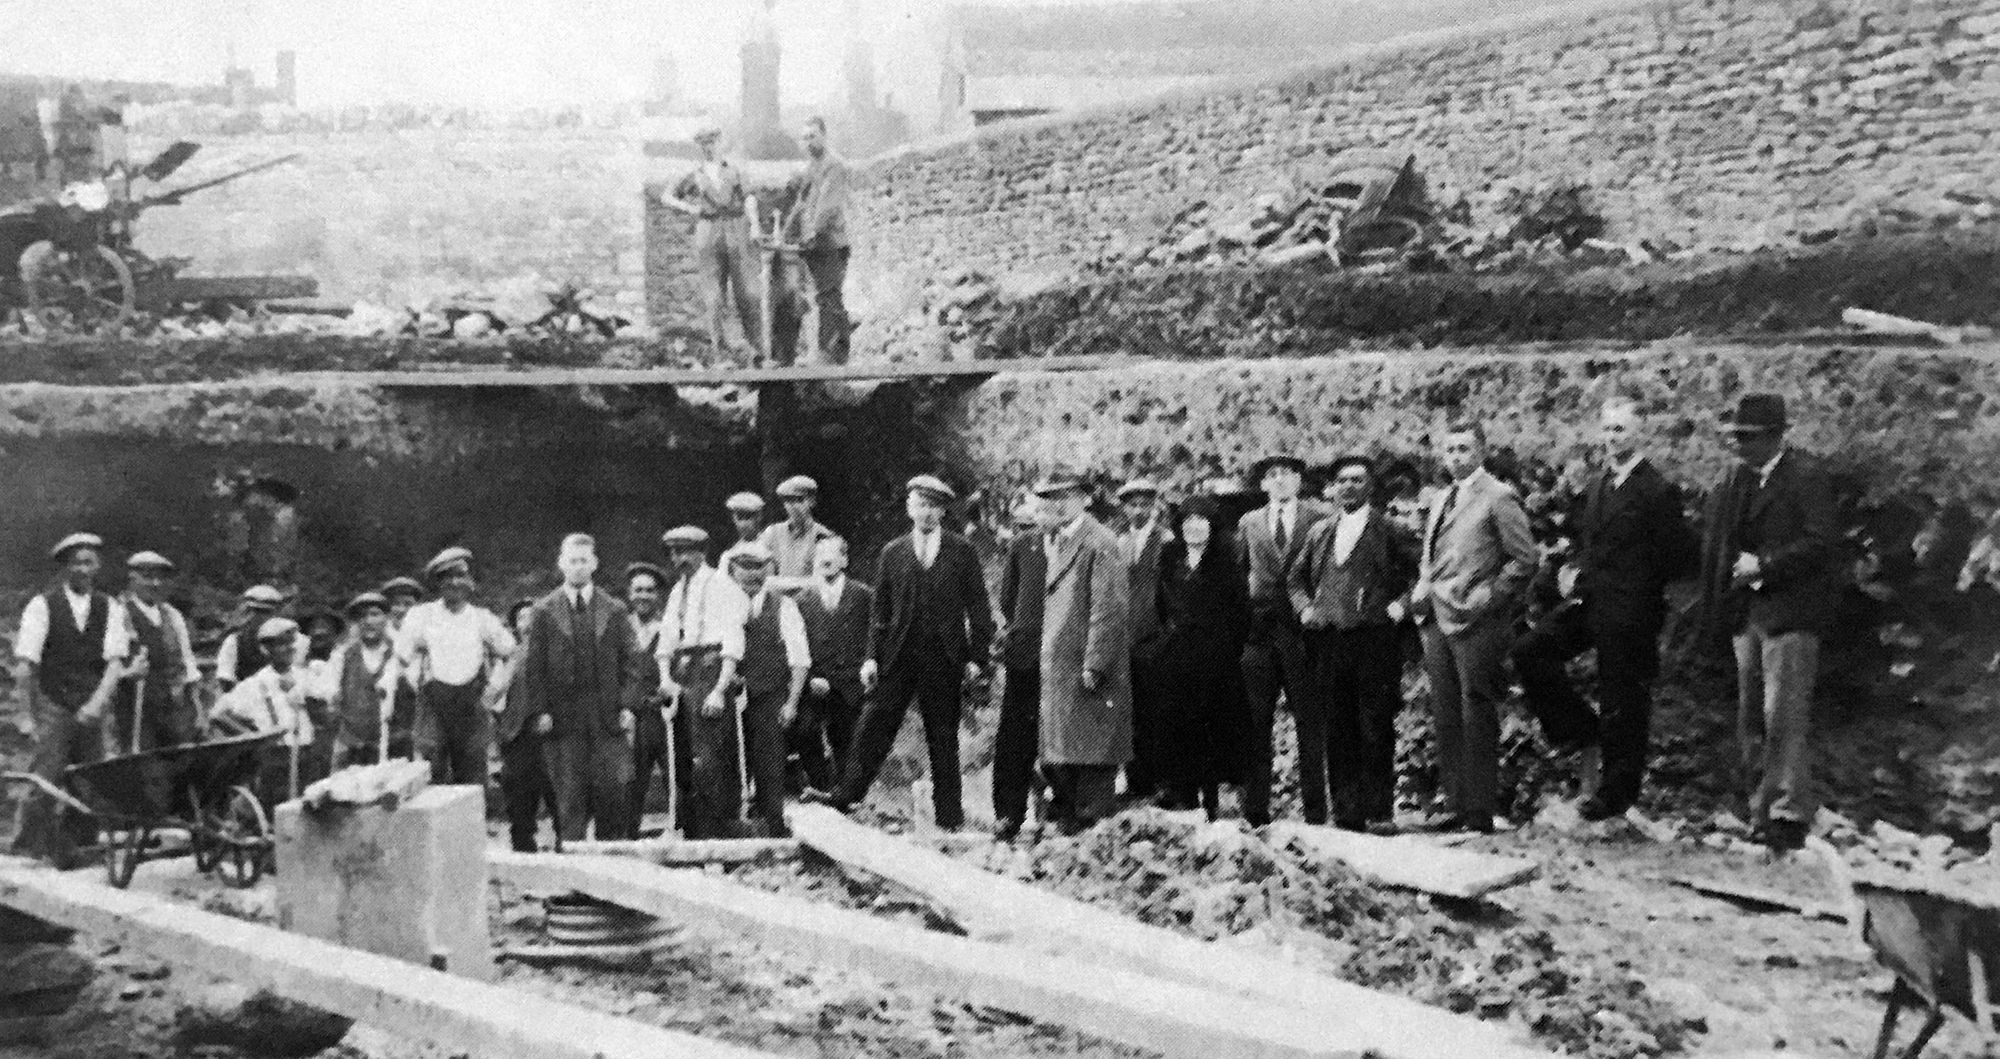 Workmen and members of the pool committee during construction. The people featured include, from the left, Mr H.T. Smith, council surveyor, standing between two workmen; in the centre is Mr Albert Lambourne, chairman of the committee, with his foot on a piece of timber; next to him is Mr Morley Smith, baker and councillor; in front of him stands Mr J.T. Mountain, chemist, wearing a topcoat; and third from the right, with his hands in his pockets, is Mr J.L. Howson, headmaster of Bicester County School.